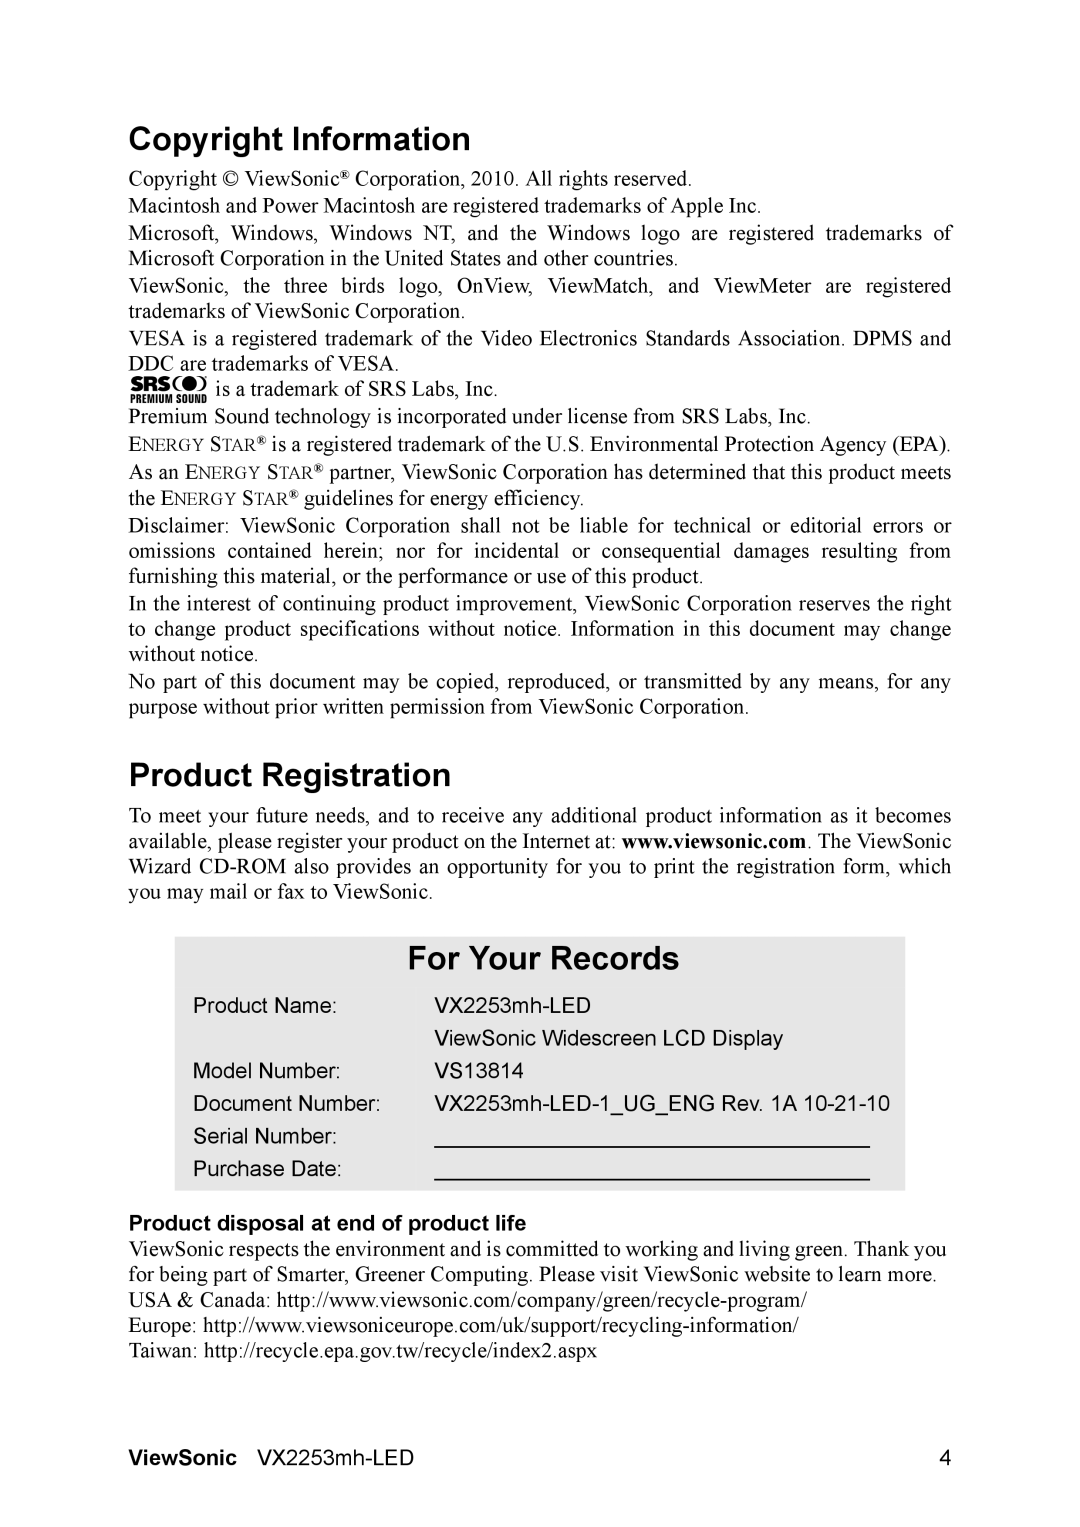 ViewSonic VX2253mh-LED warranty Copyright Information, Product Registration For Your Records 